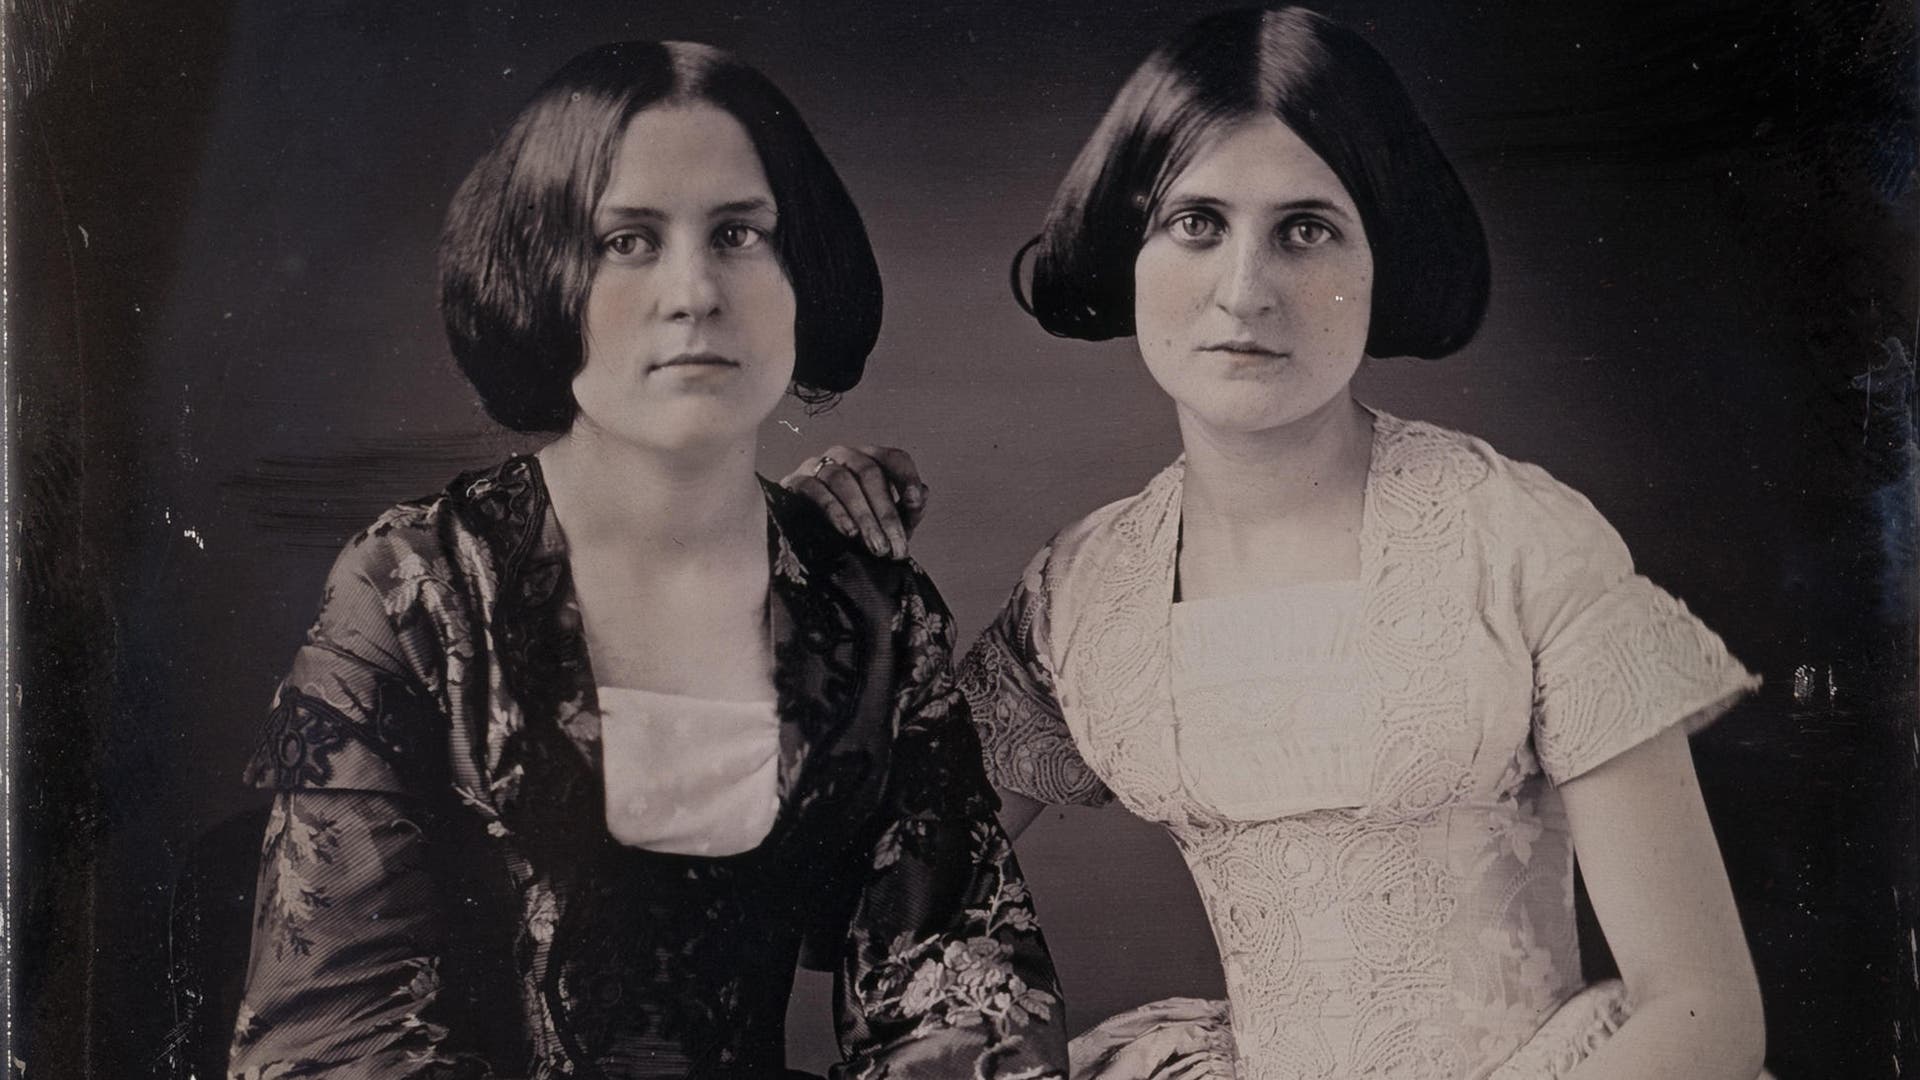 Portrait of Kate and Maggie Fox, Spirit Mediums from Rochester, New York. Along the bottom edge of the daguerreotype "Kate and Maggie Fox, Rochester Mediums, T.M. Easterly Daguerrean" is inscribed.